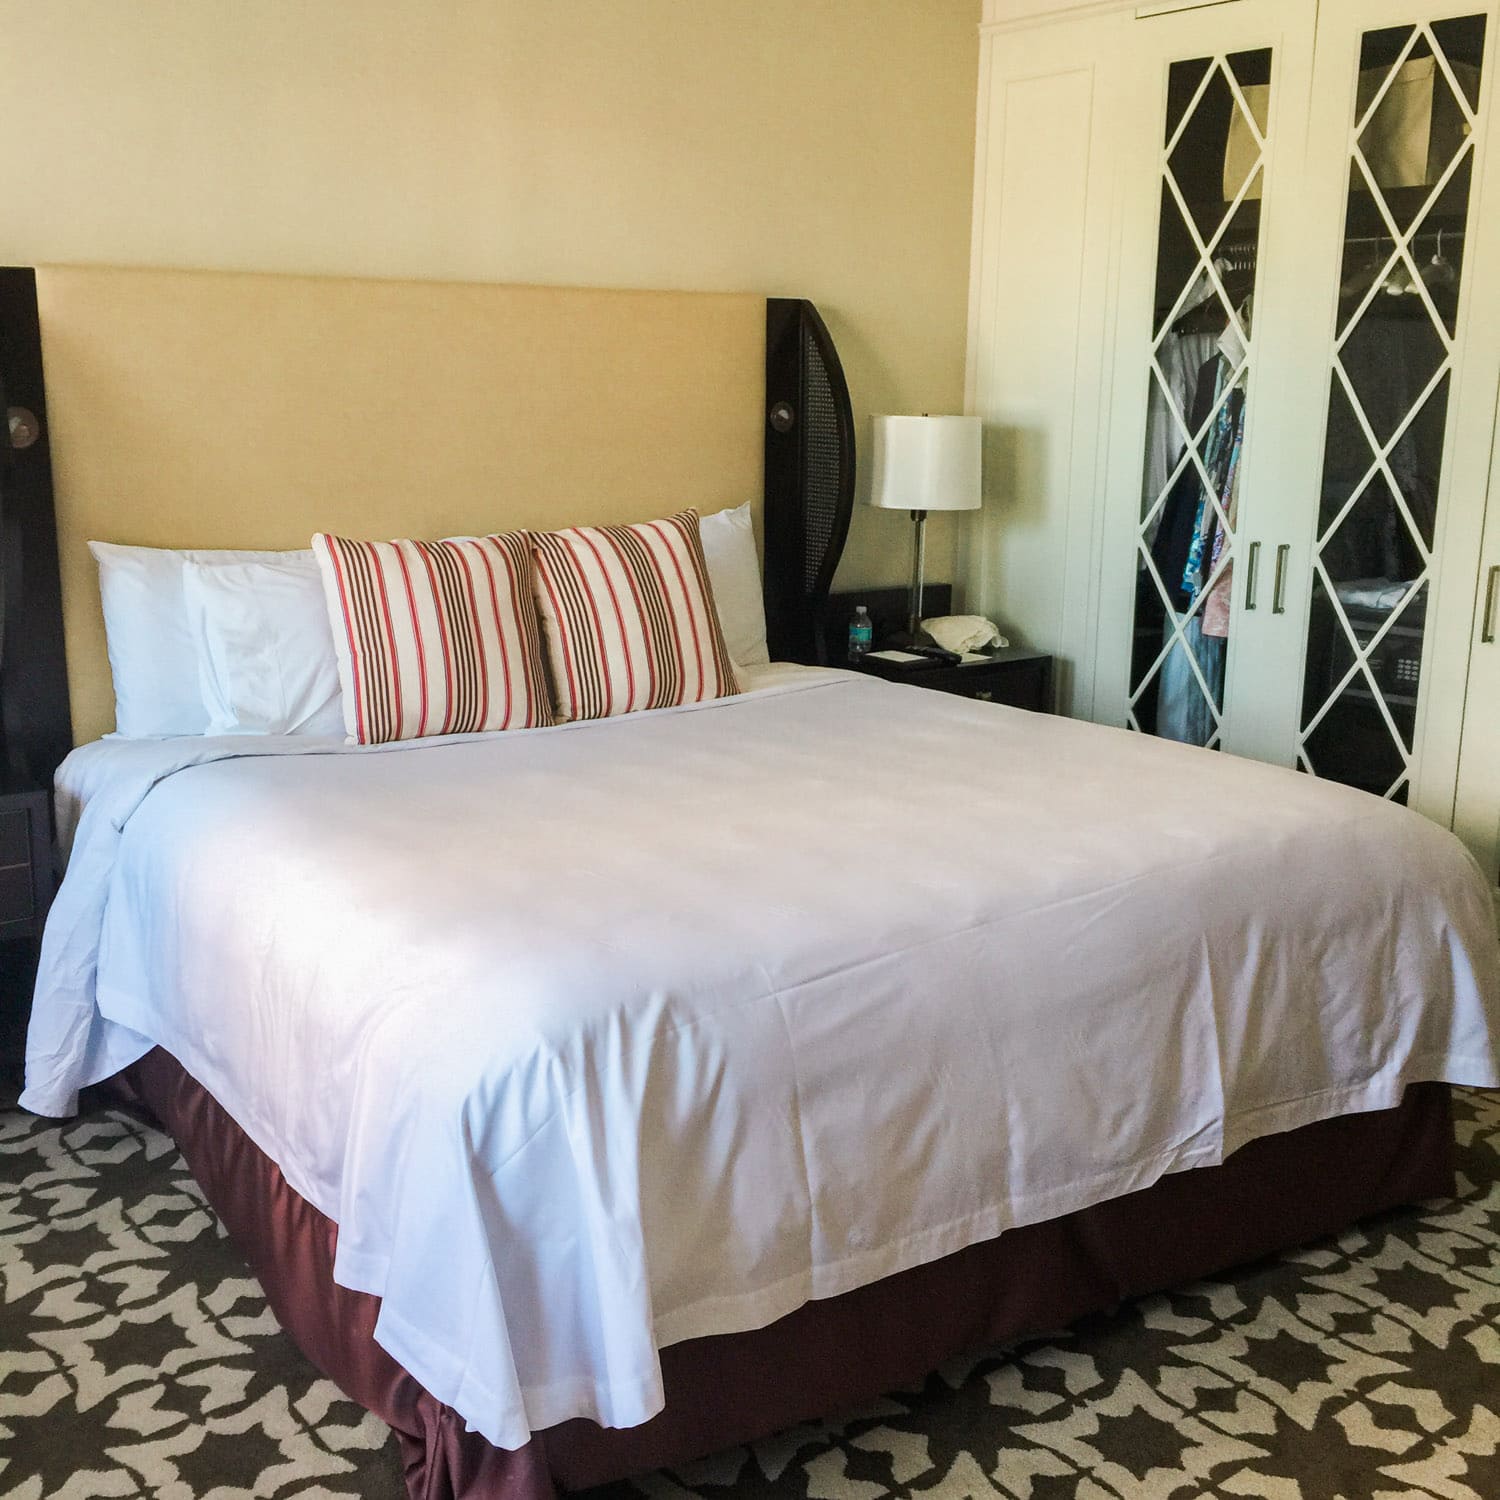 A full review of the Boca Raton Resort & Club by blogger Ashley Brooke Nicholas